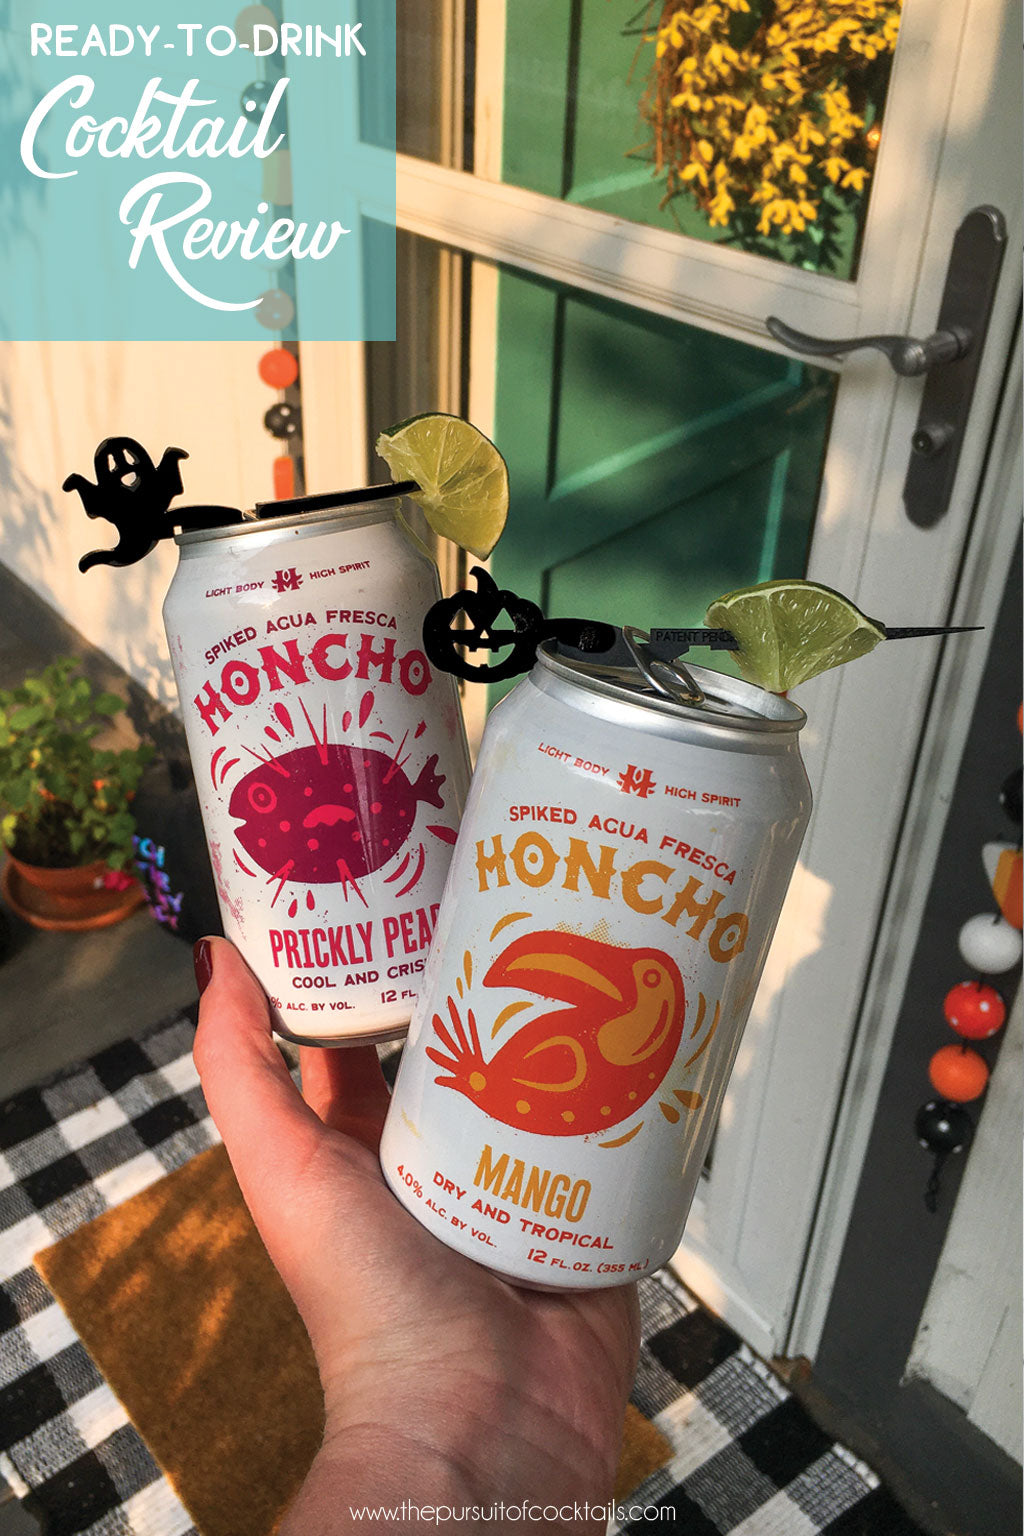 Honcho Spiked Agua Fresca canned cocktail review by The Pursuit of Cocktails